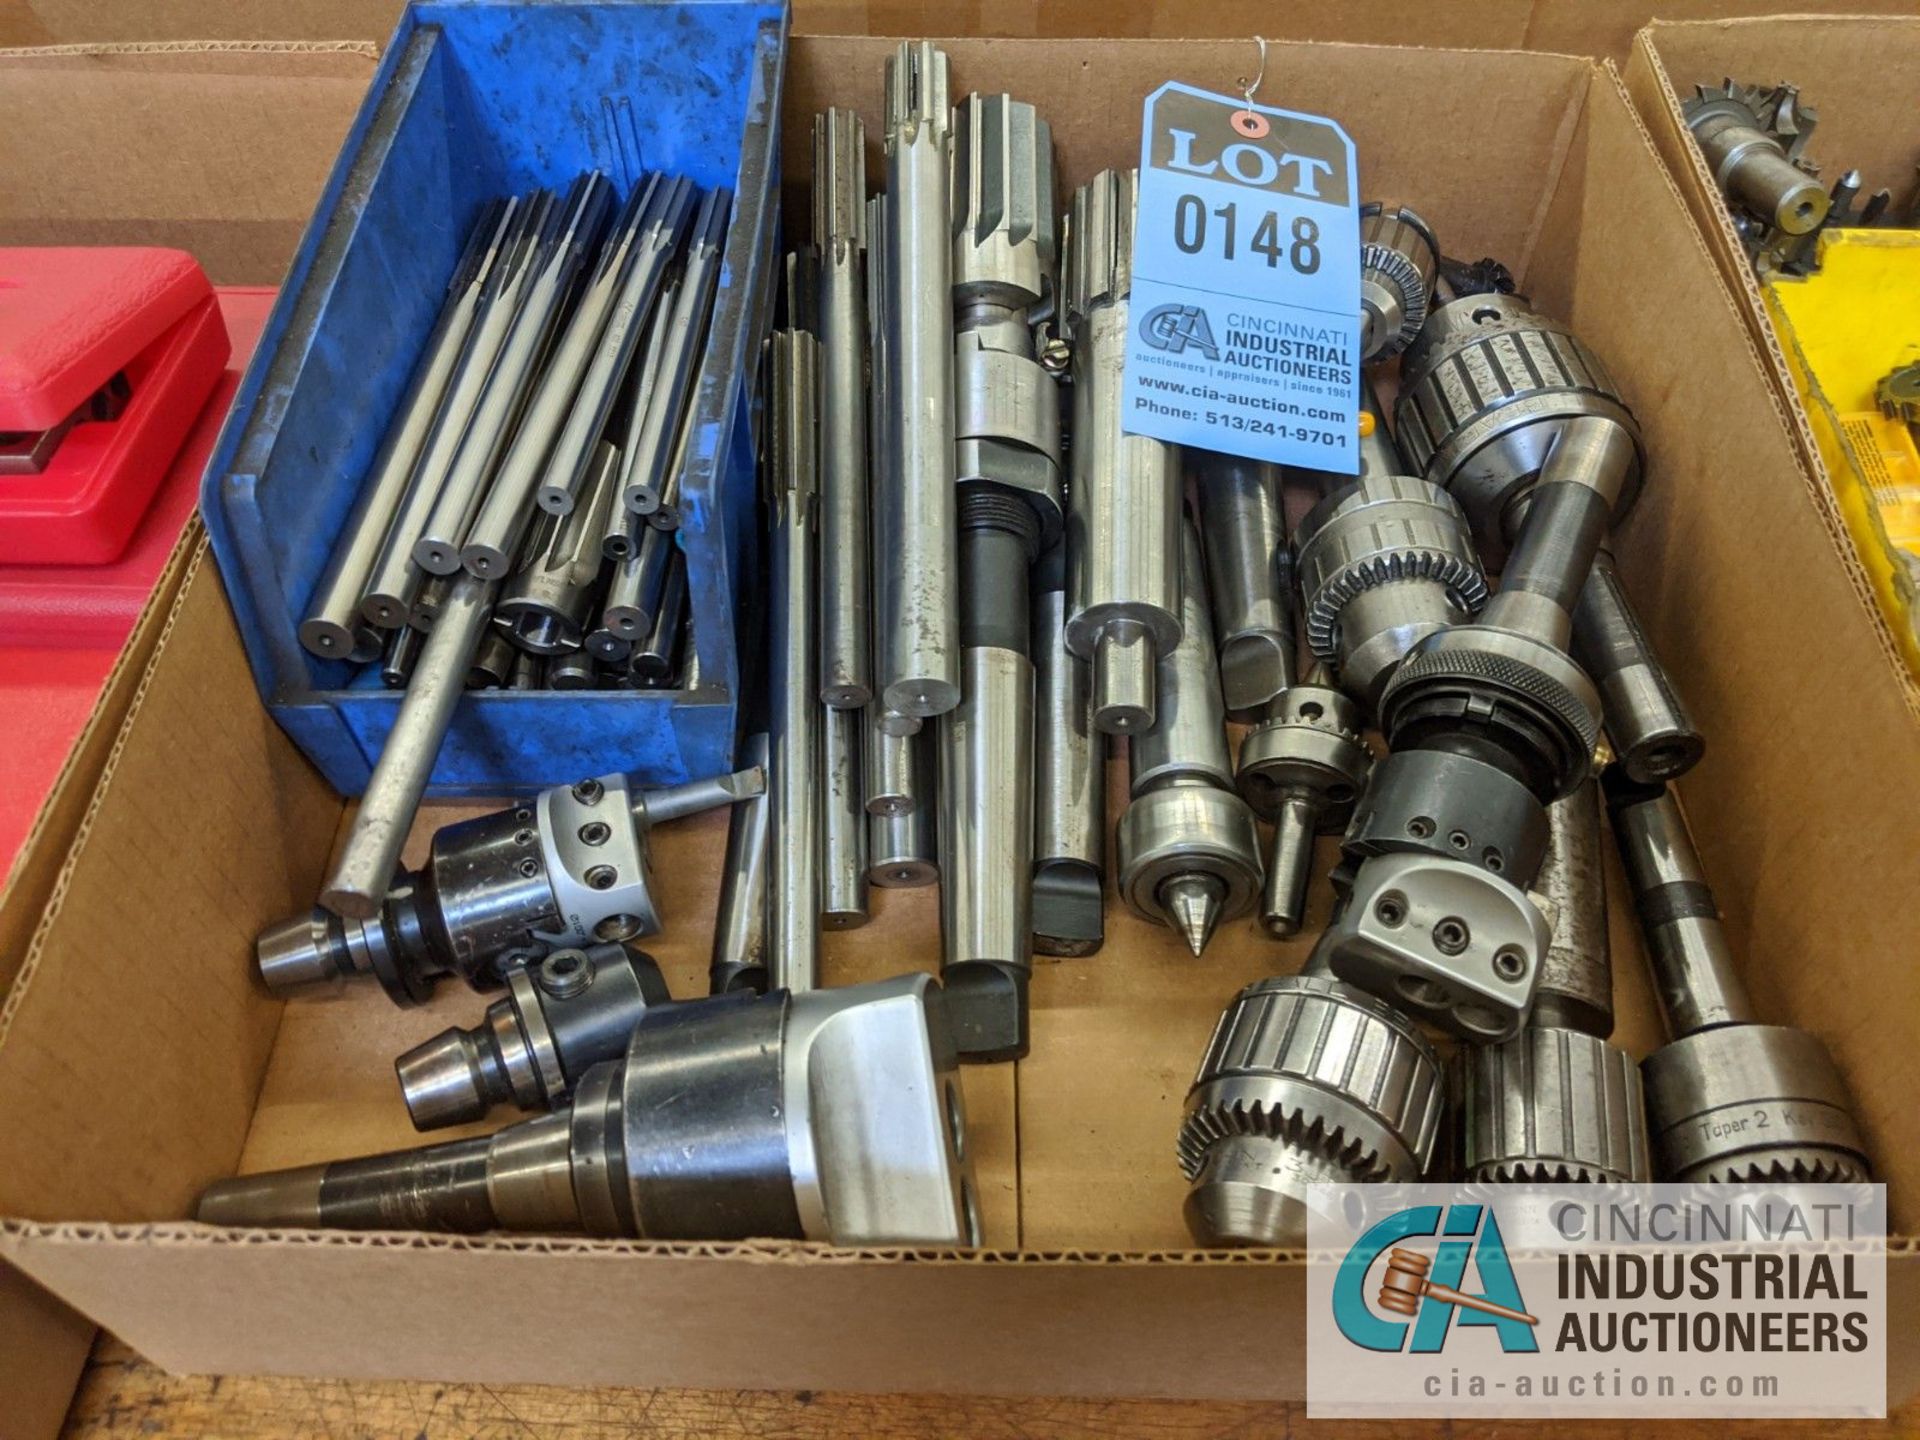 (LOT) BOX OF TOOLING; REAMERS, DRILL CHUCKS, LIVE CENTERS, ADJUSTABLE BORING HEADS